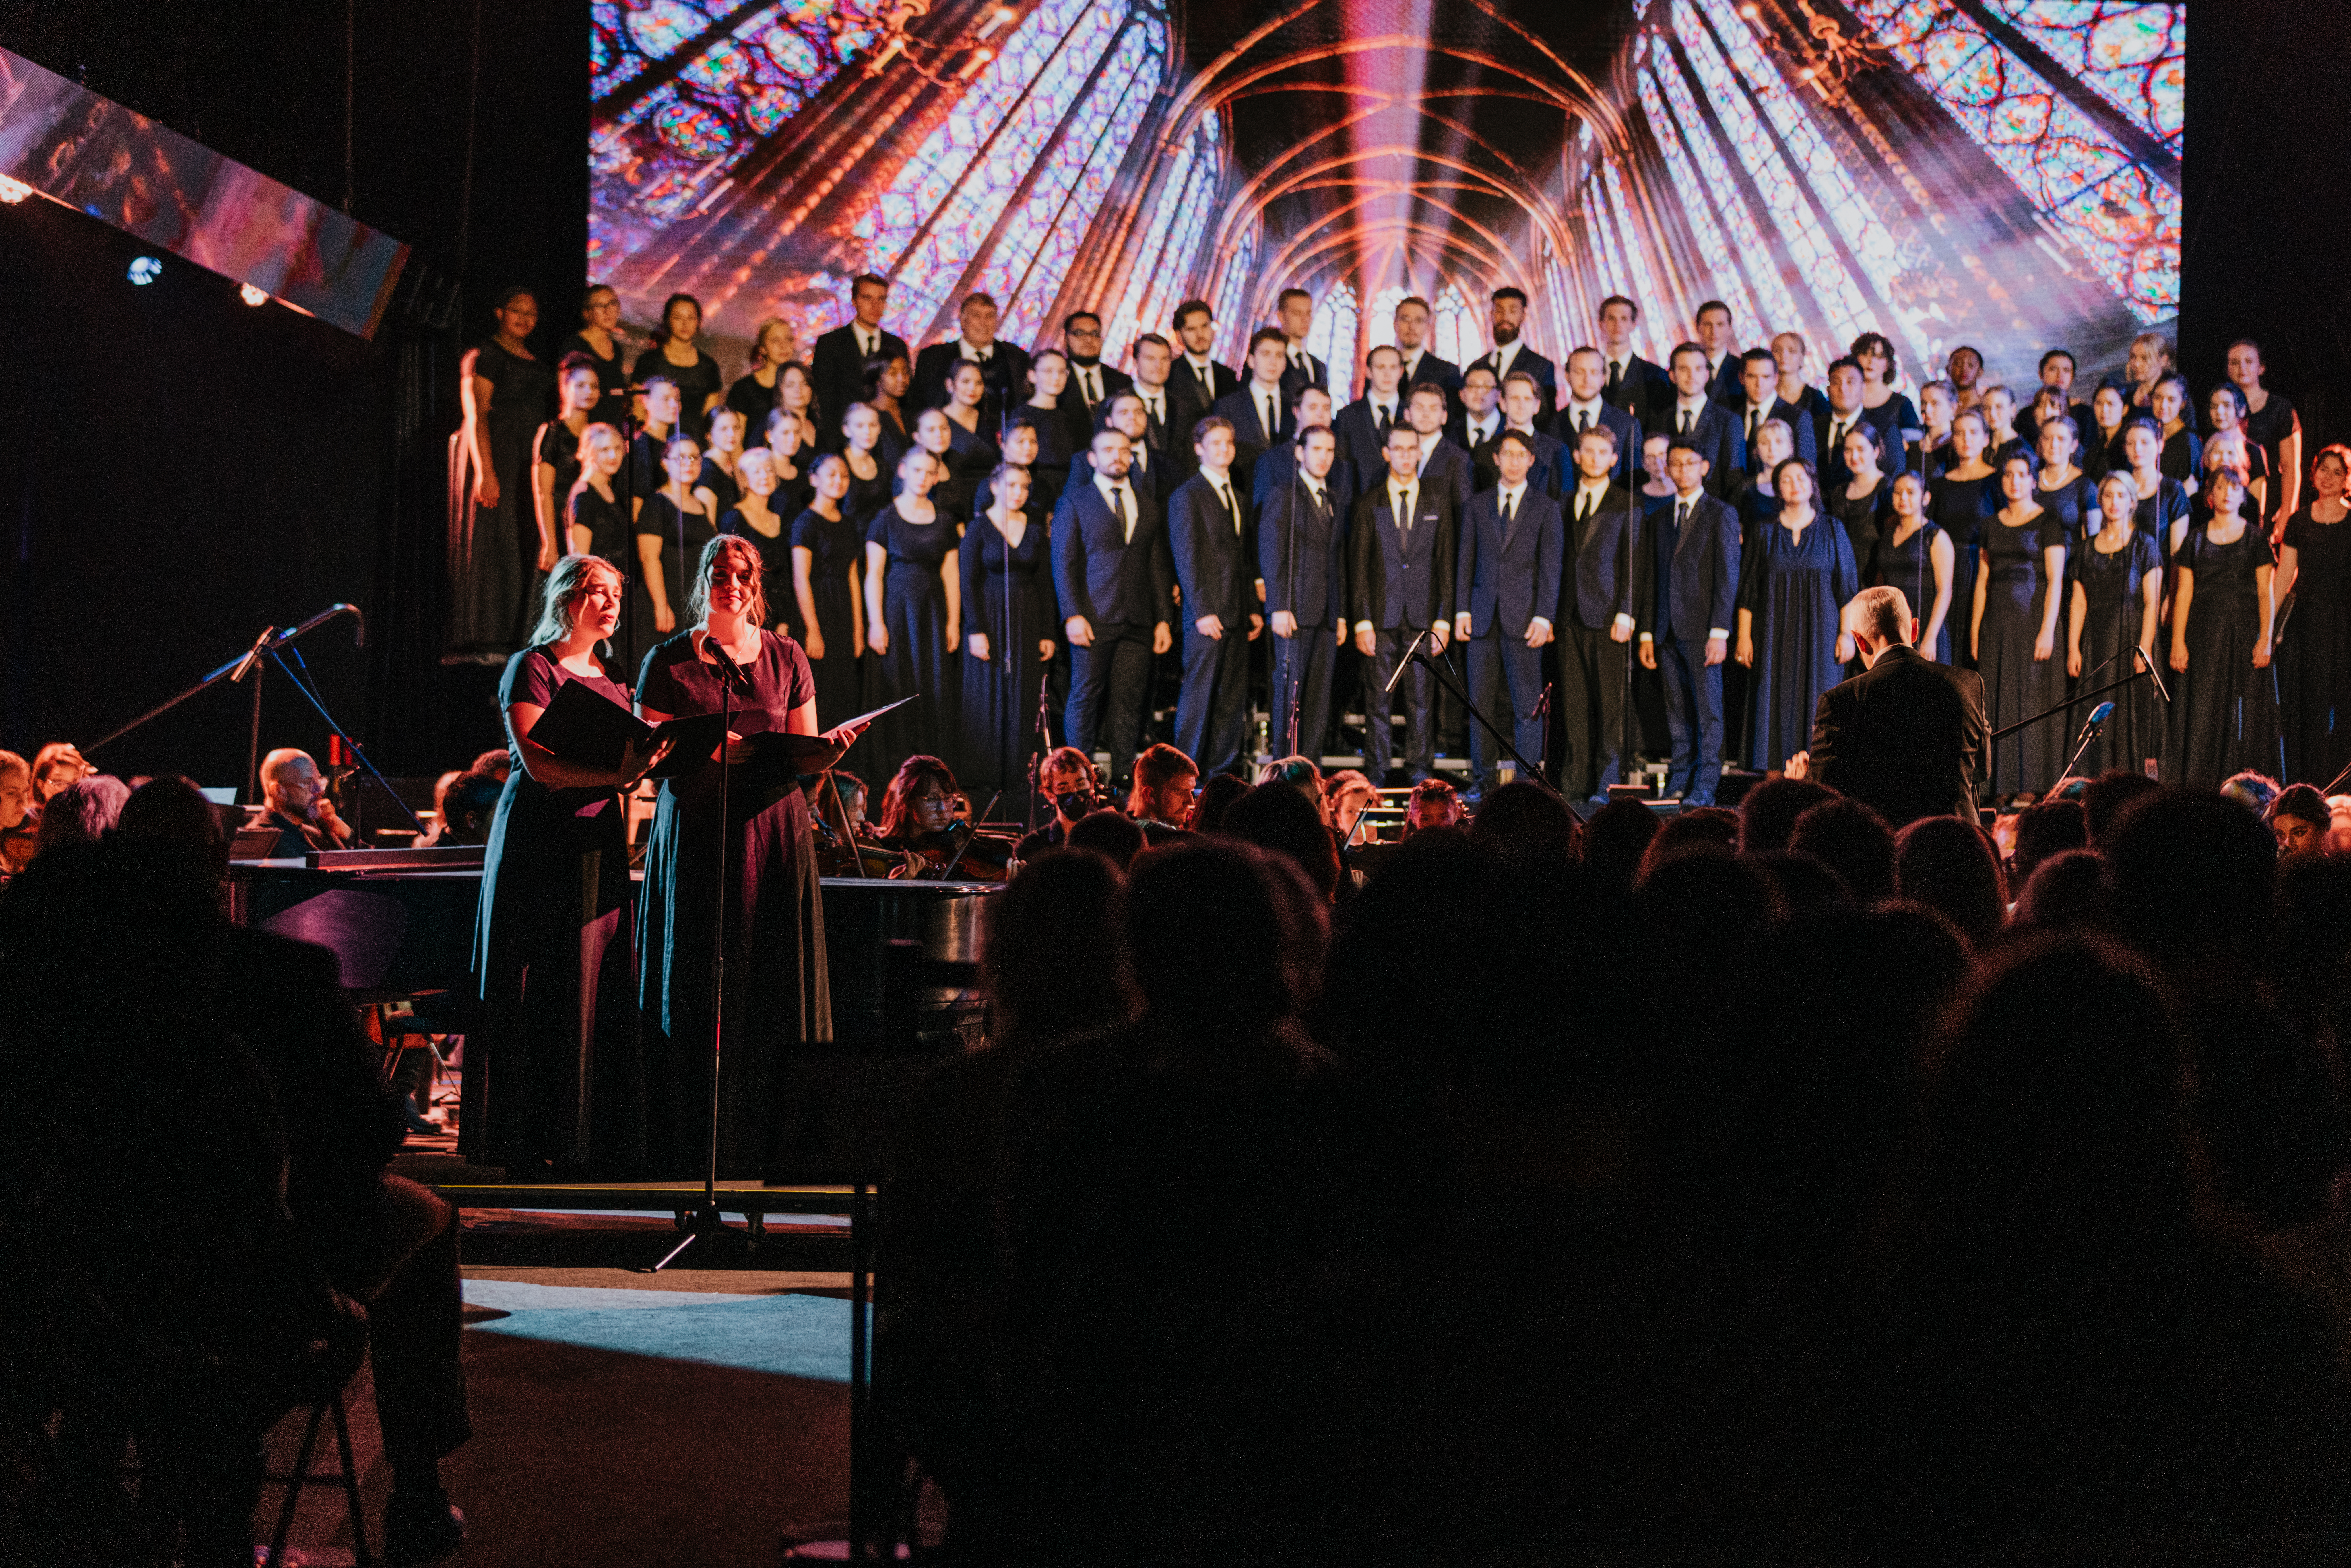 TMU To Host Annual Christmas Concert — and a Christmas Market Featured Image